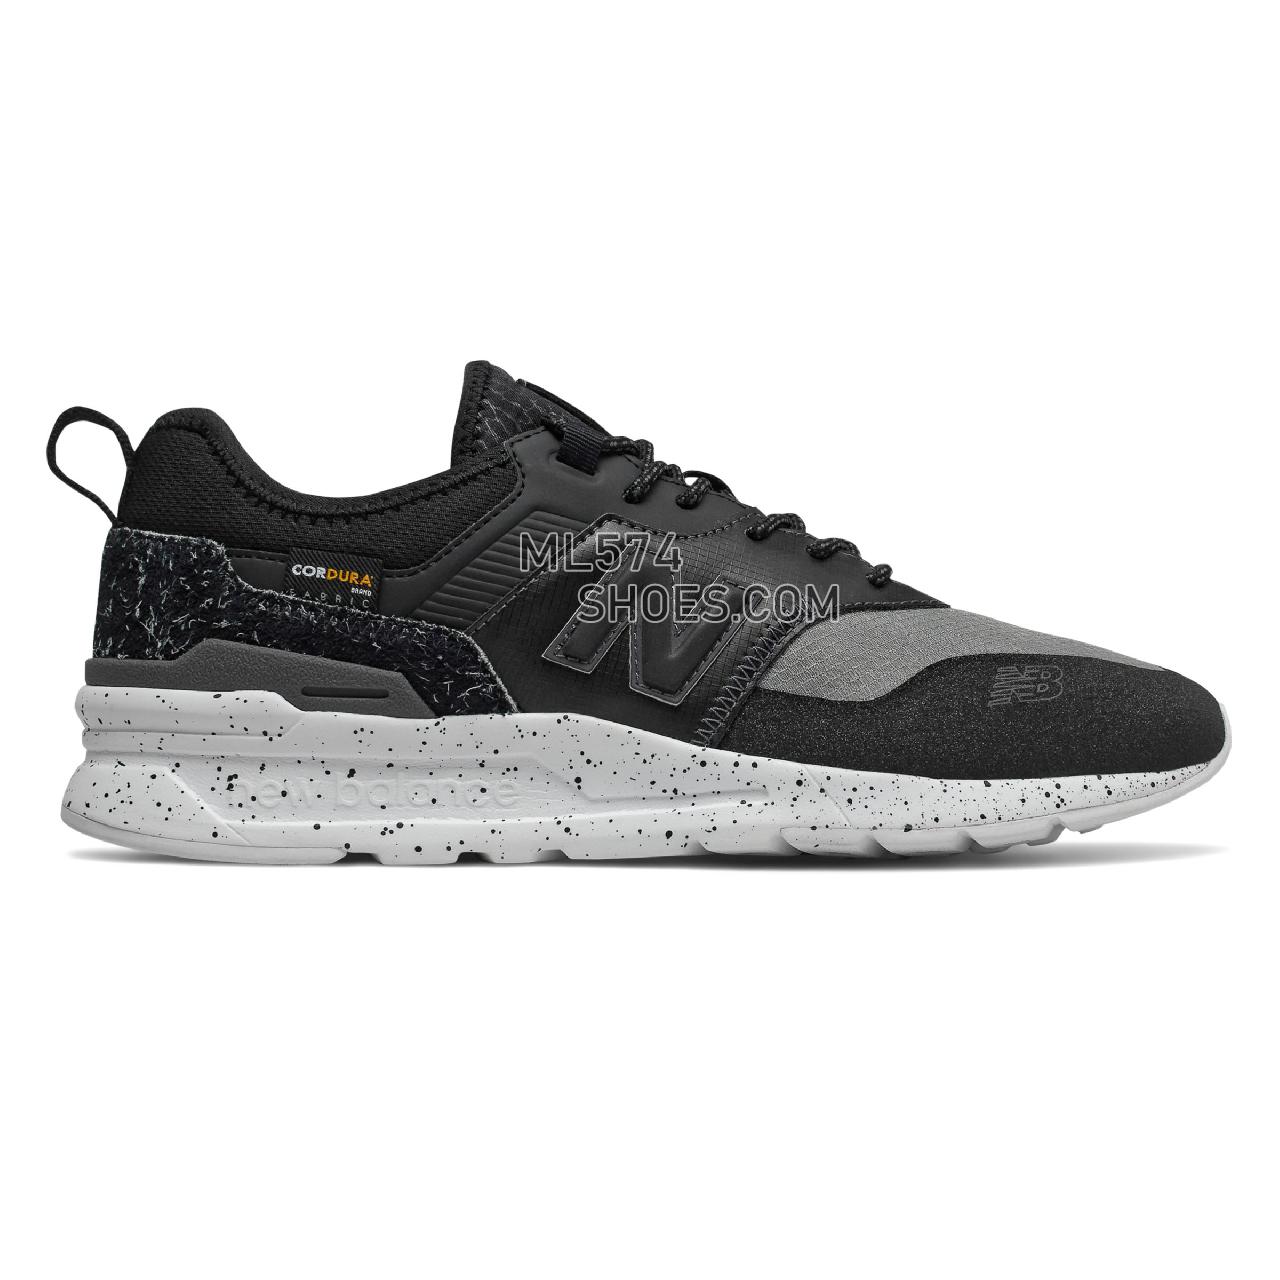 New Balance 997H Spring Hike Trail - Men's All Terrain - Black with White and Grey - CMT997HF